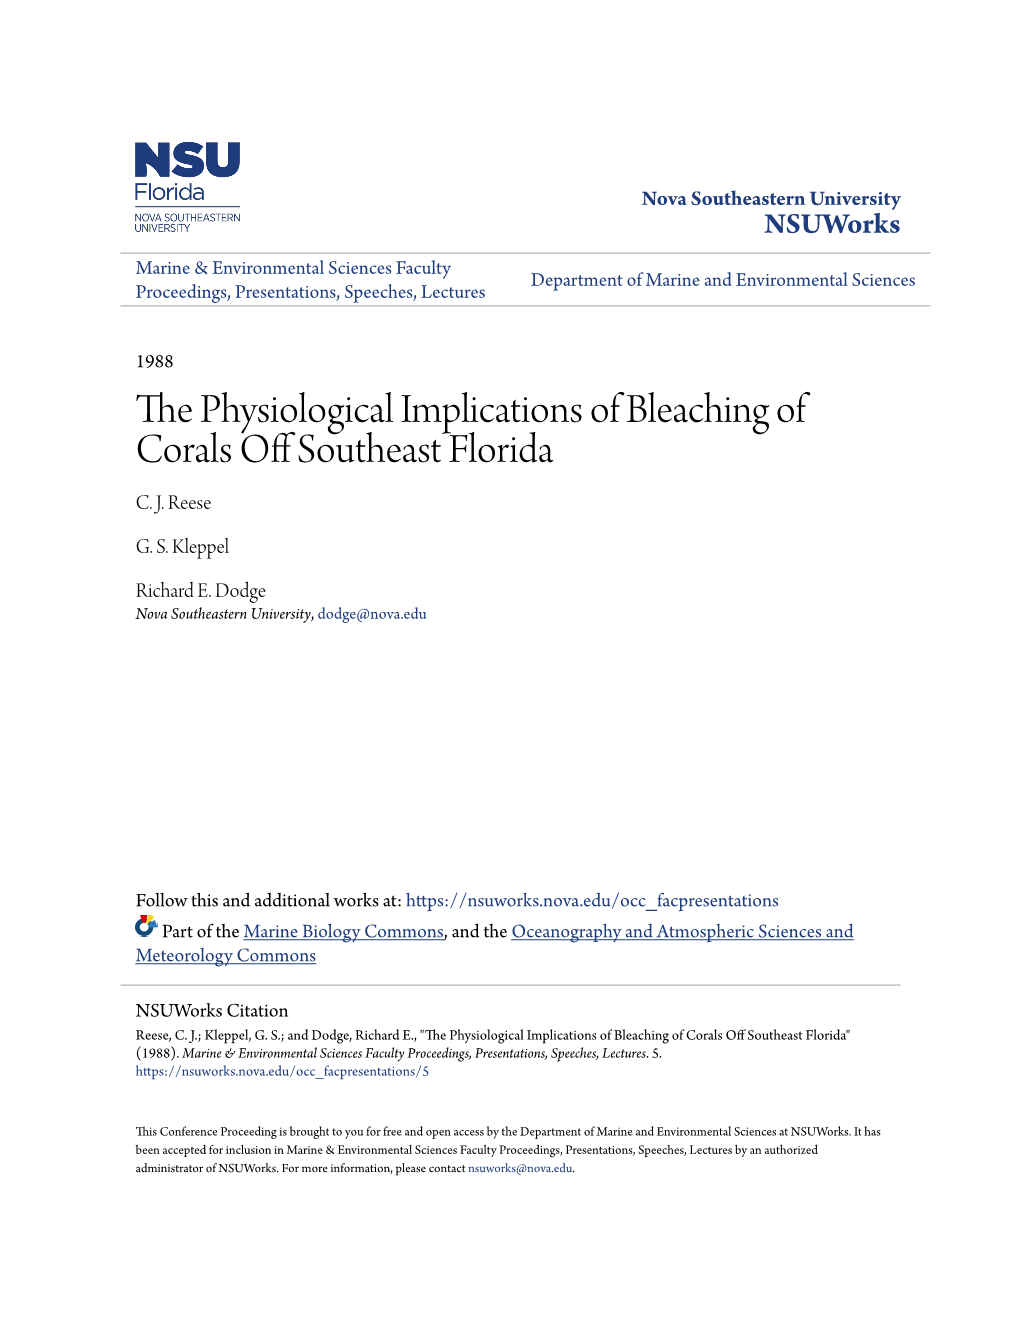 THE PHYSIOLOGICAL IMPLICATIONS of BLEACHING of CORALS OFF SOUTHEAST Florida